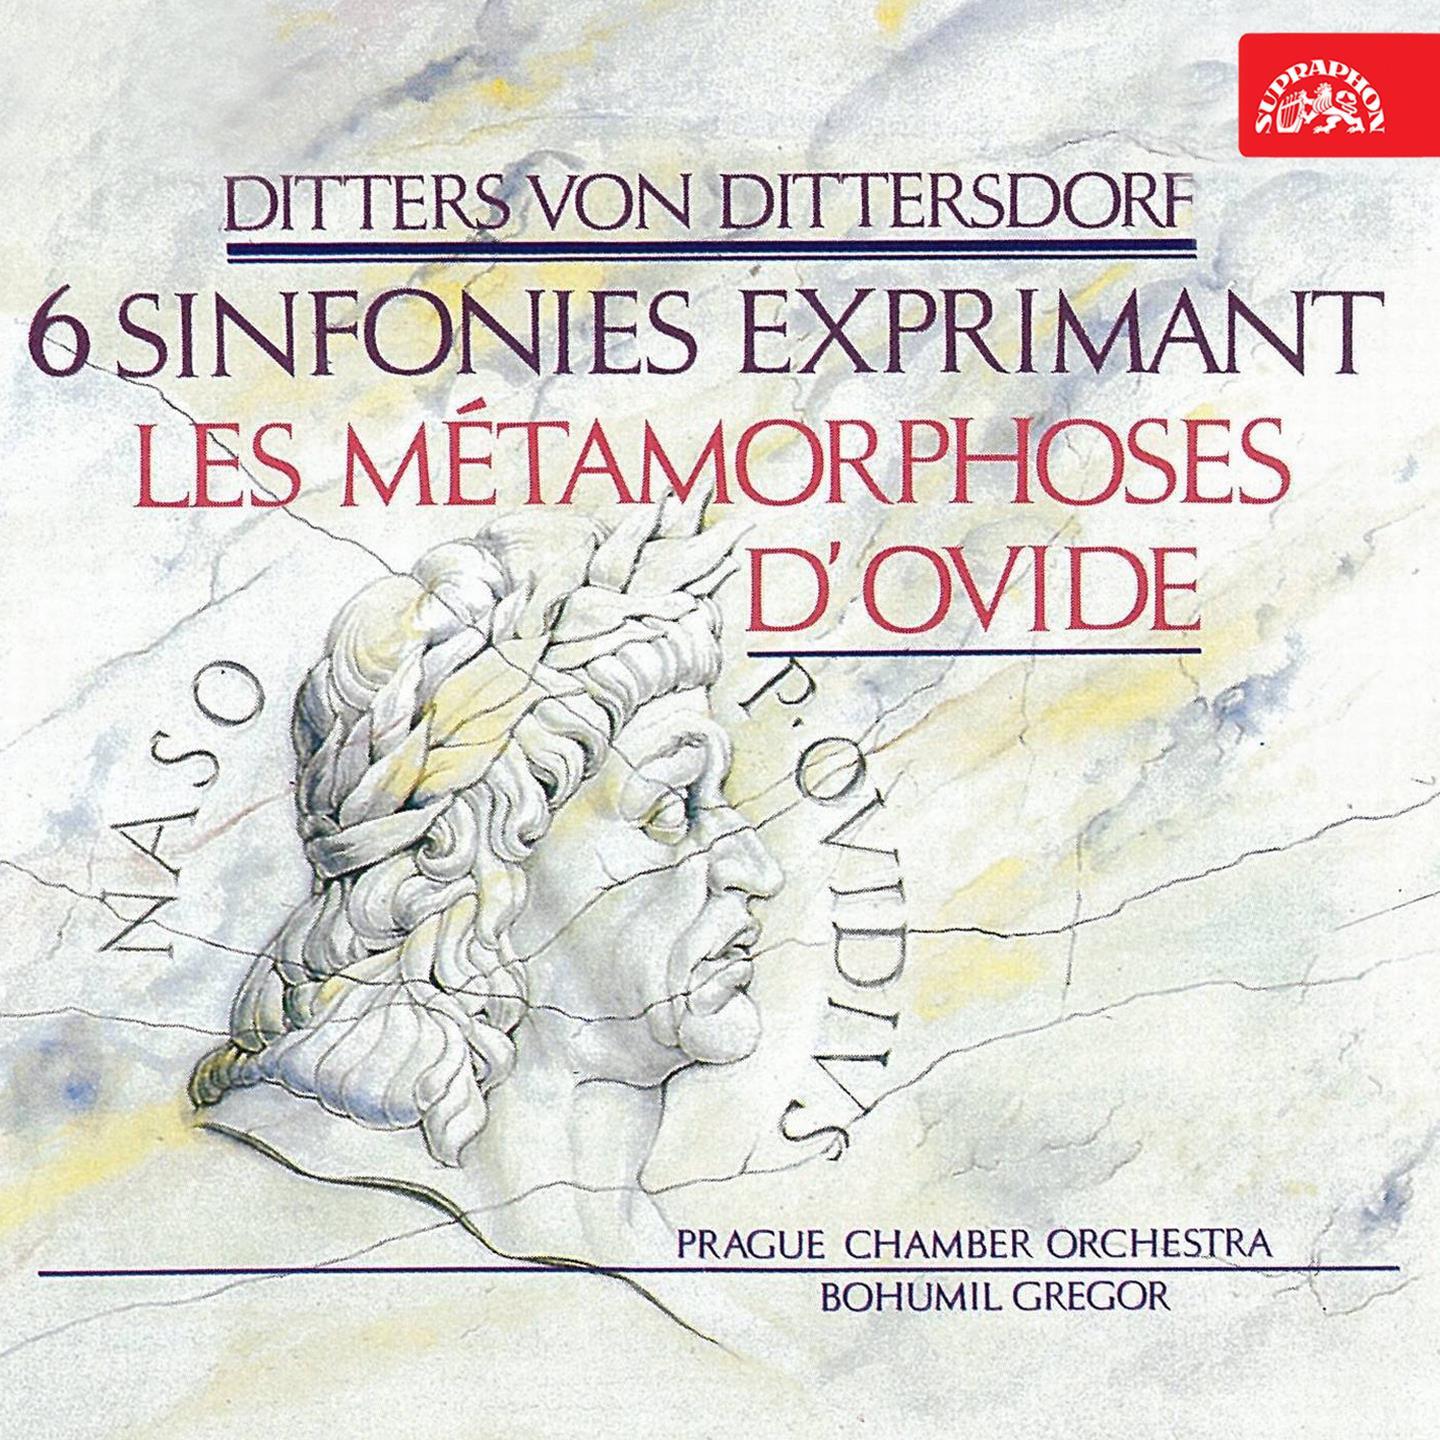 Symphonies After Ovid's Metamorphoses, No. 4 in F Major, Kr. 76 "Die Rettung der Andromeda durch Perseus": III. Larghetto - Tempo di minuetto